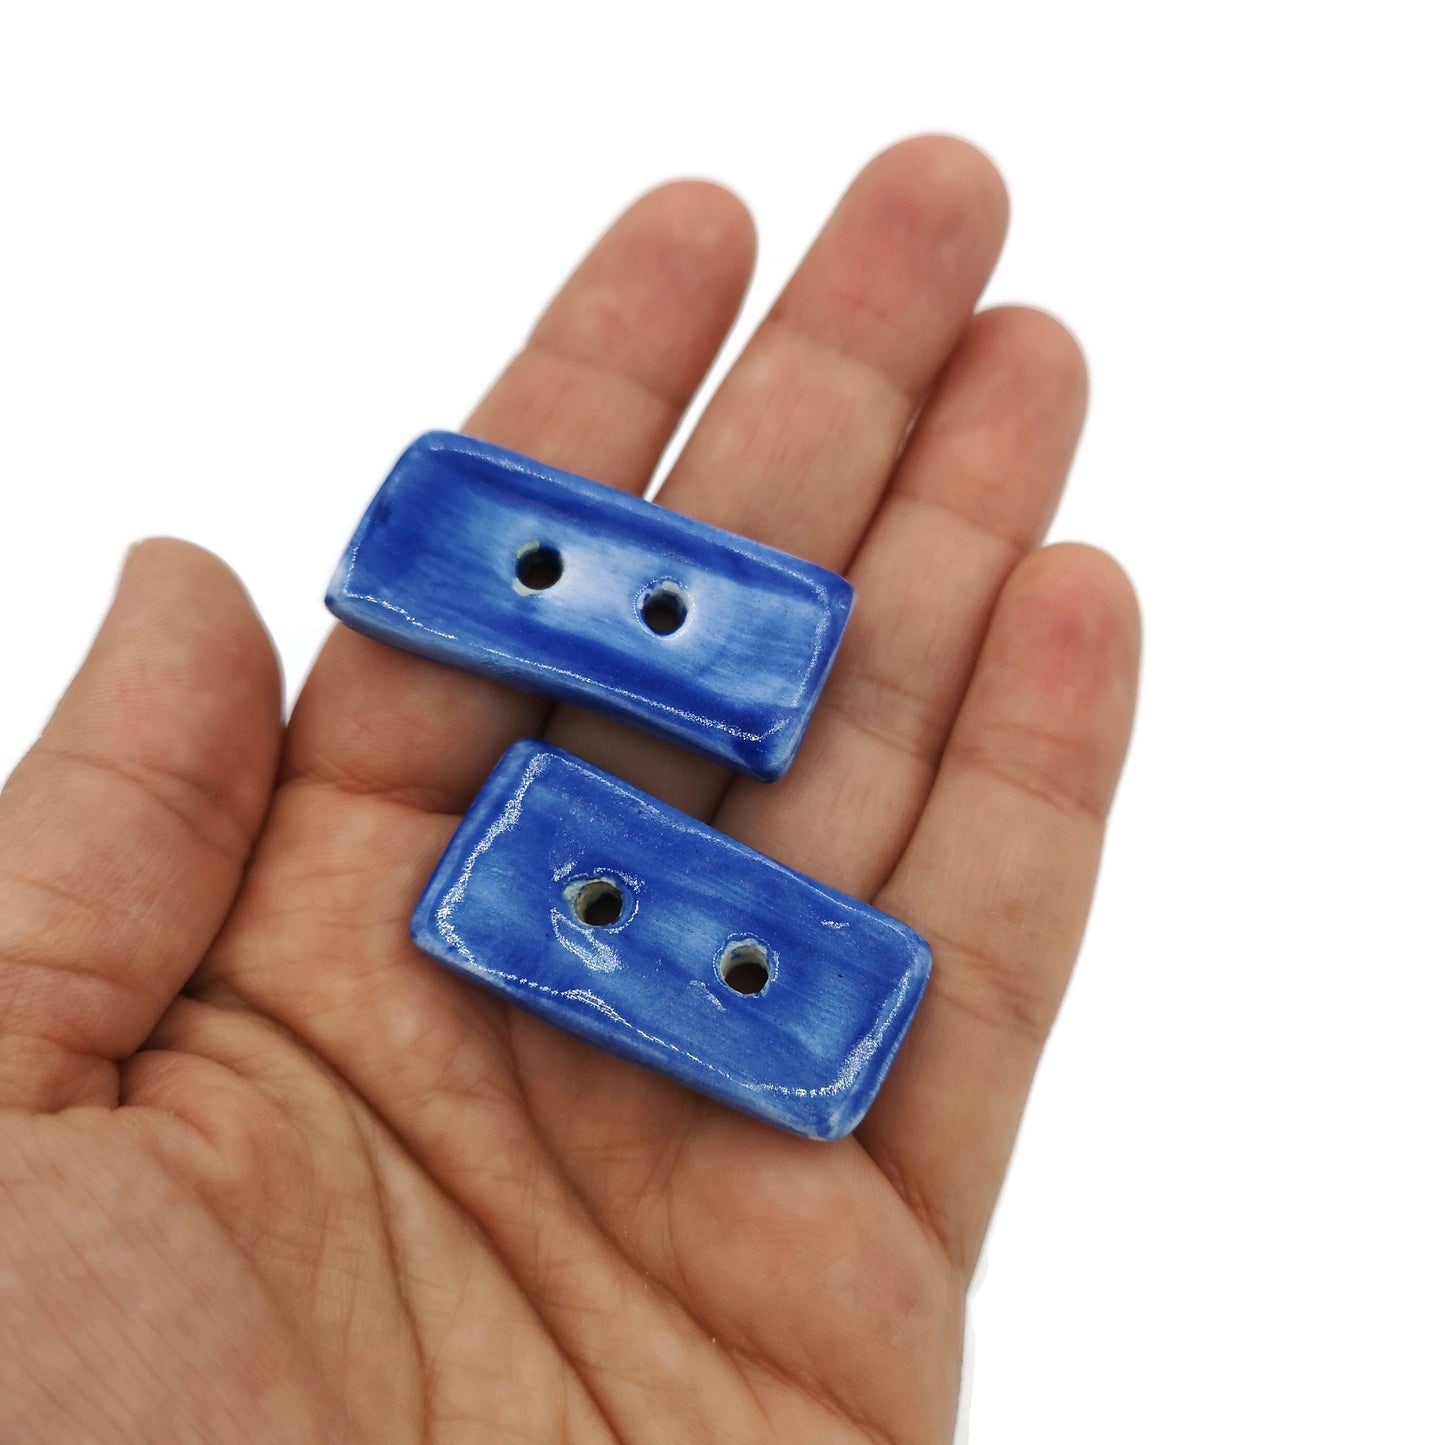 2Pc 40mm Blue Rectangular Handmade Ceramic Sewing Buttons For Crafts, Novelty Extra Large Buttons, Unique Sewing Supplies And Notions - Ceramica Ana Rafael